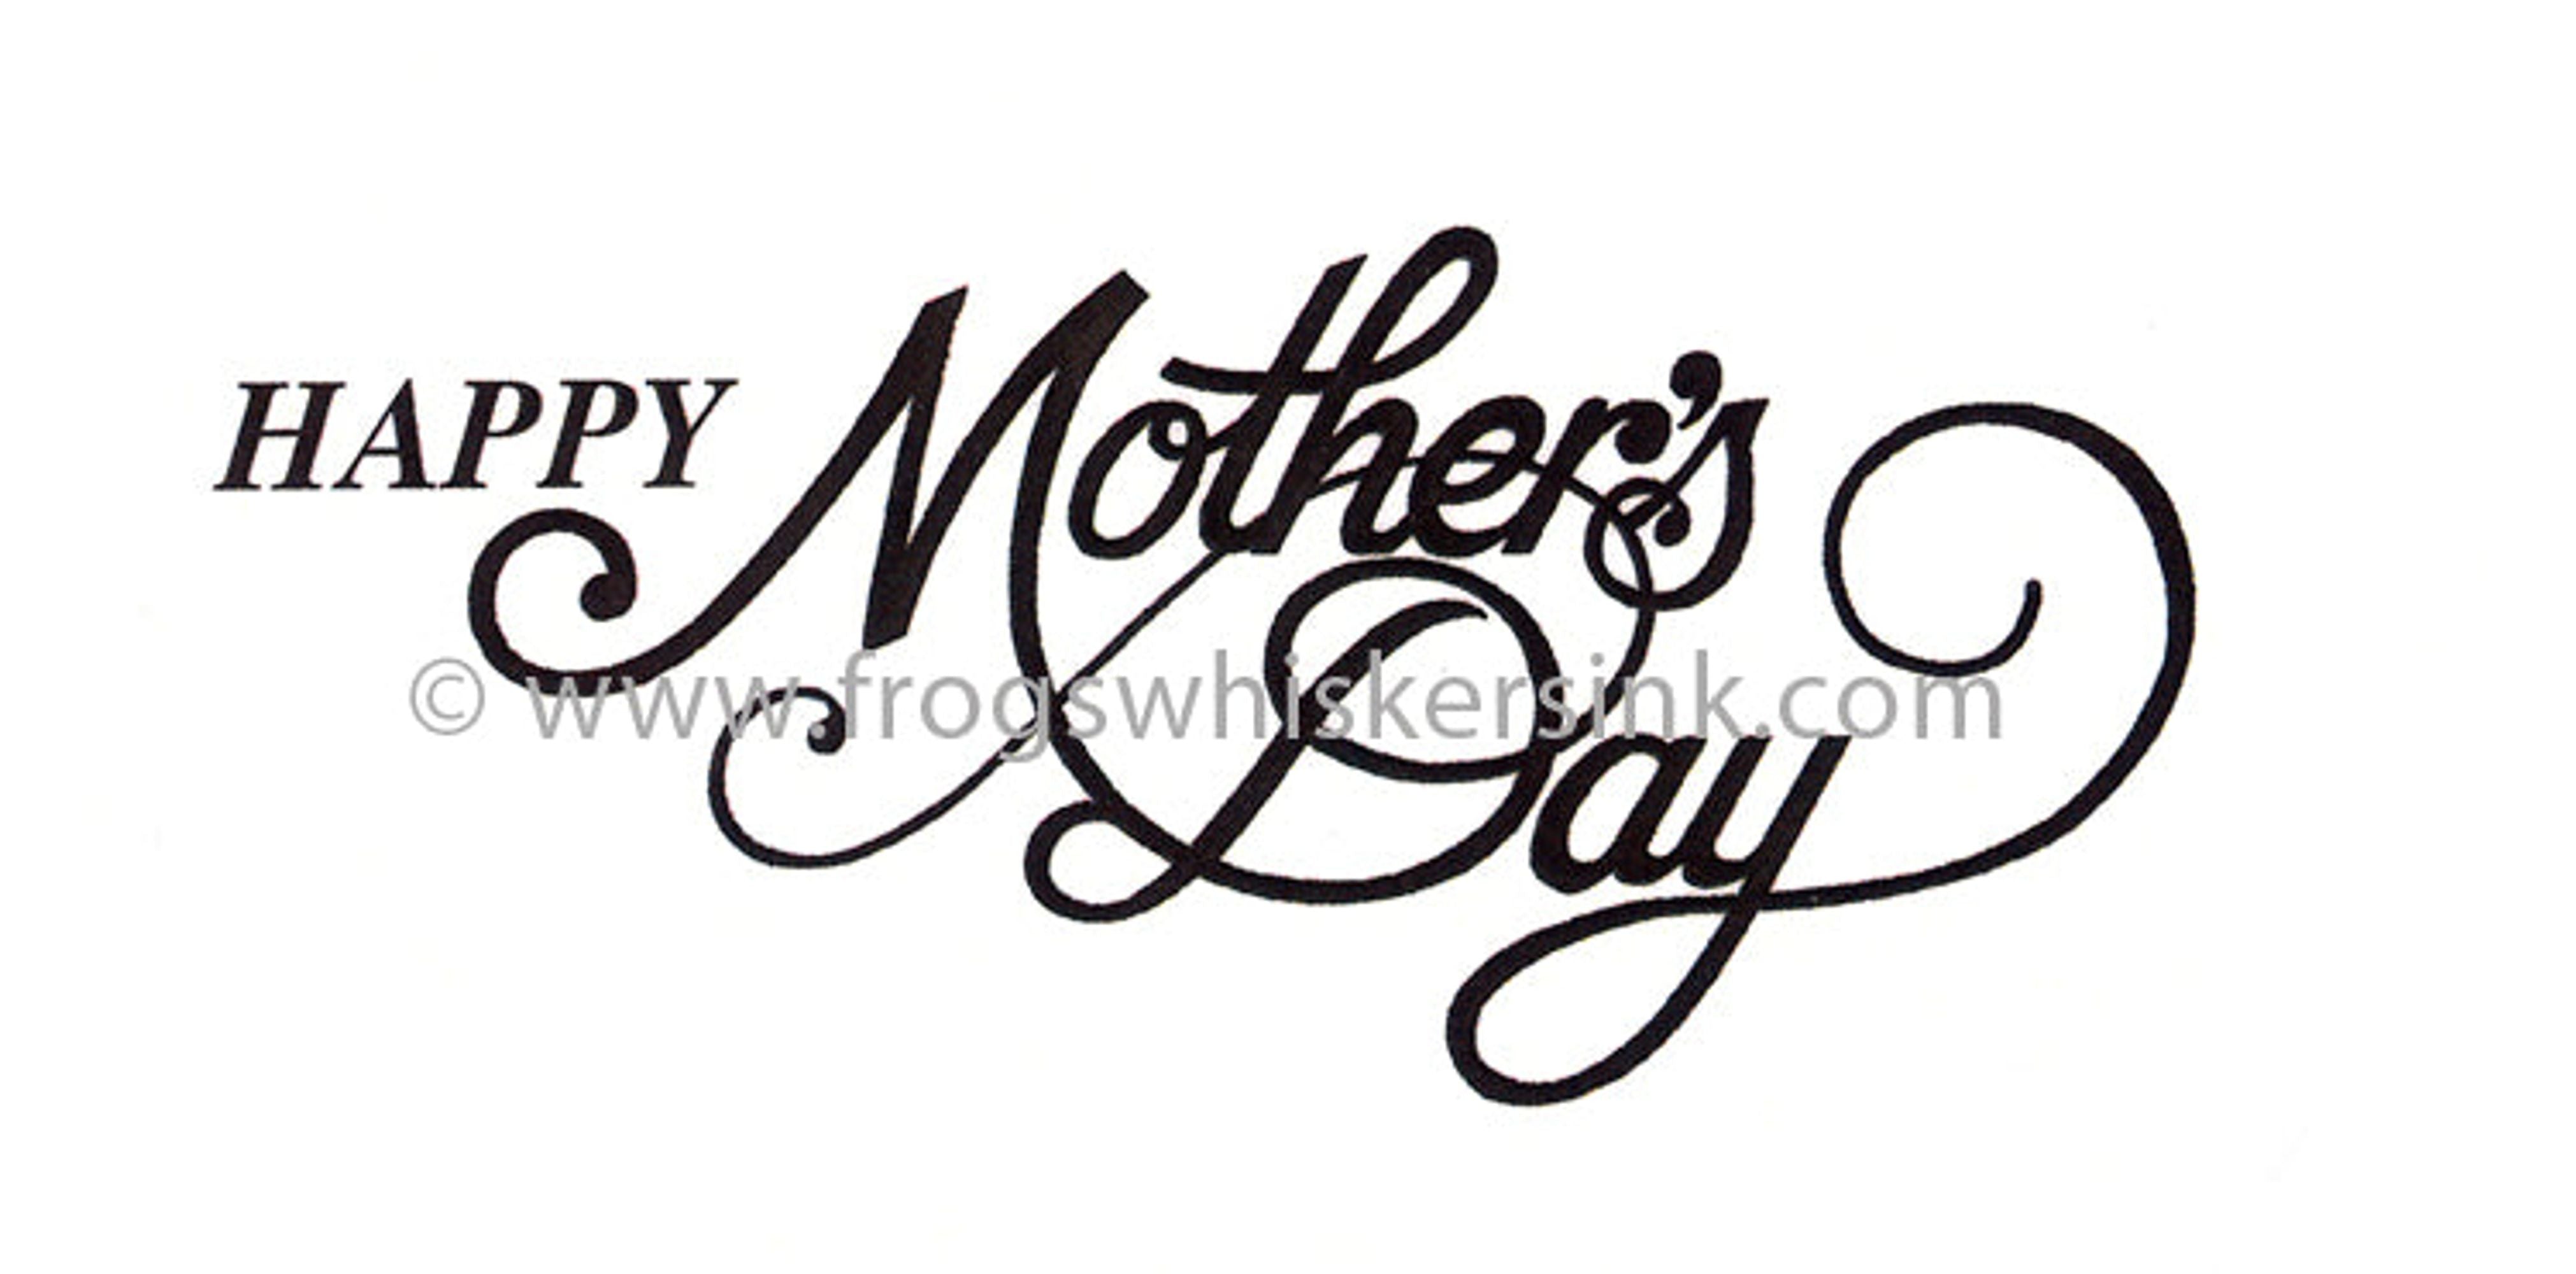 Frog's Whiskers Ink Stamps -Happy Mother's Day Cling Mount Stamp